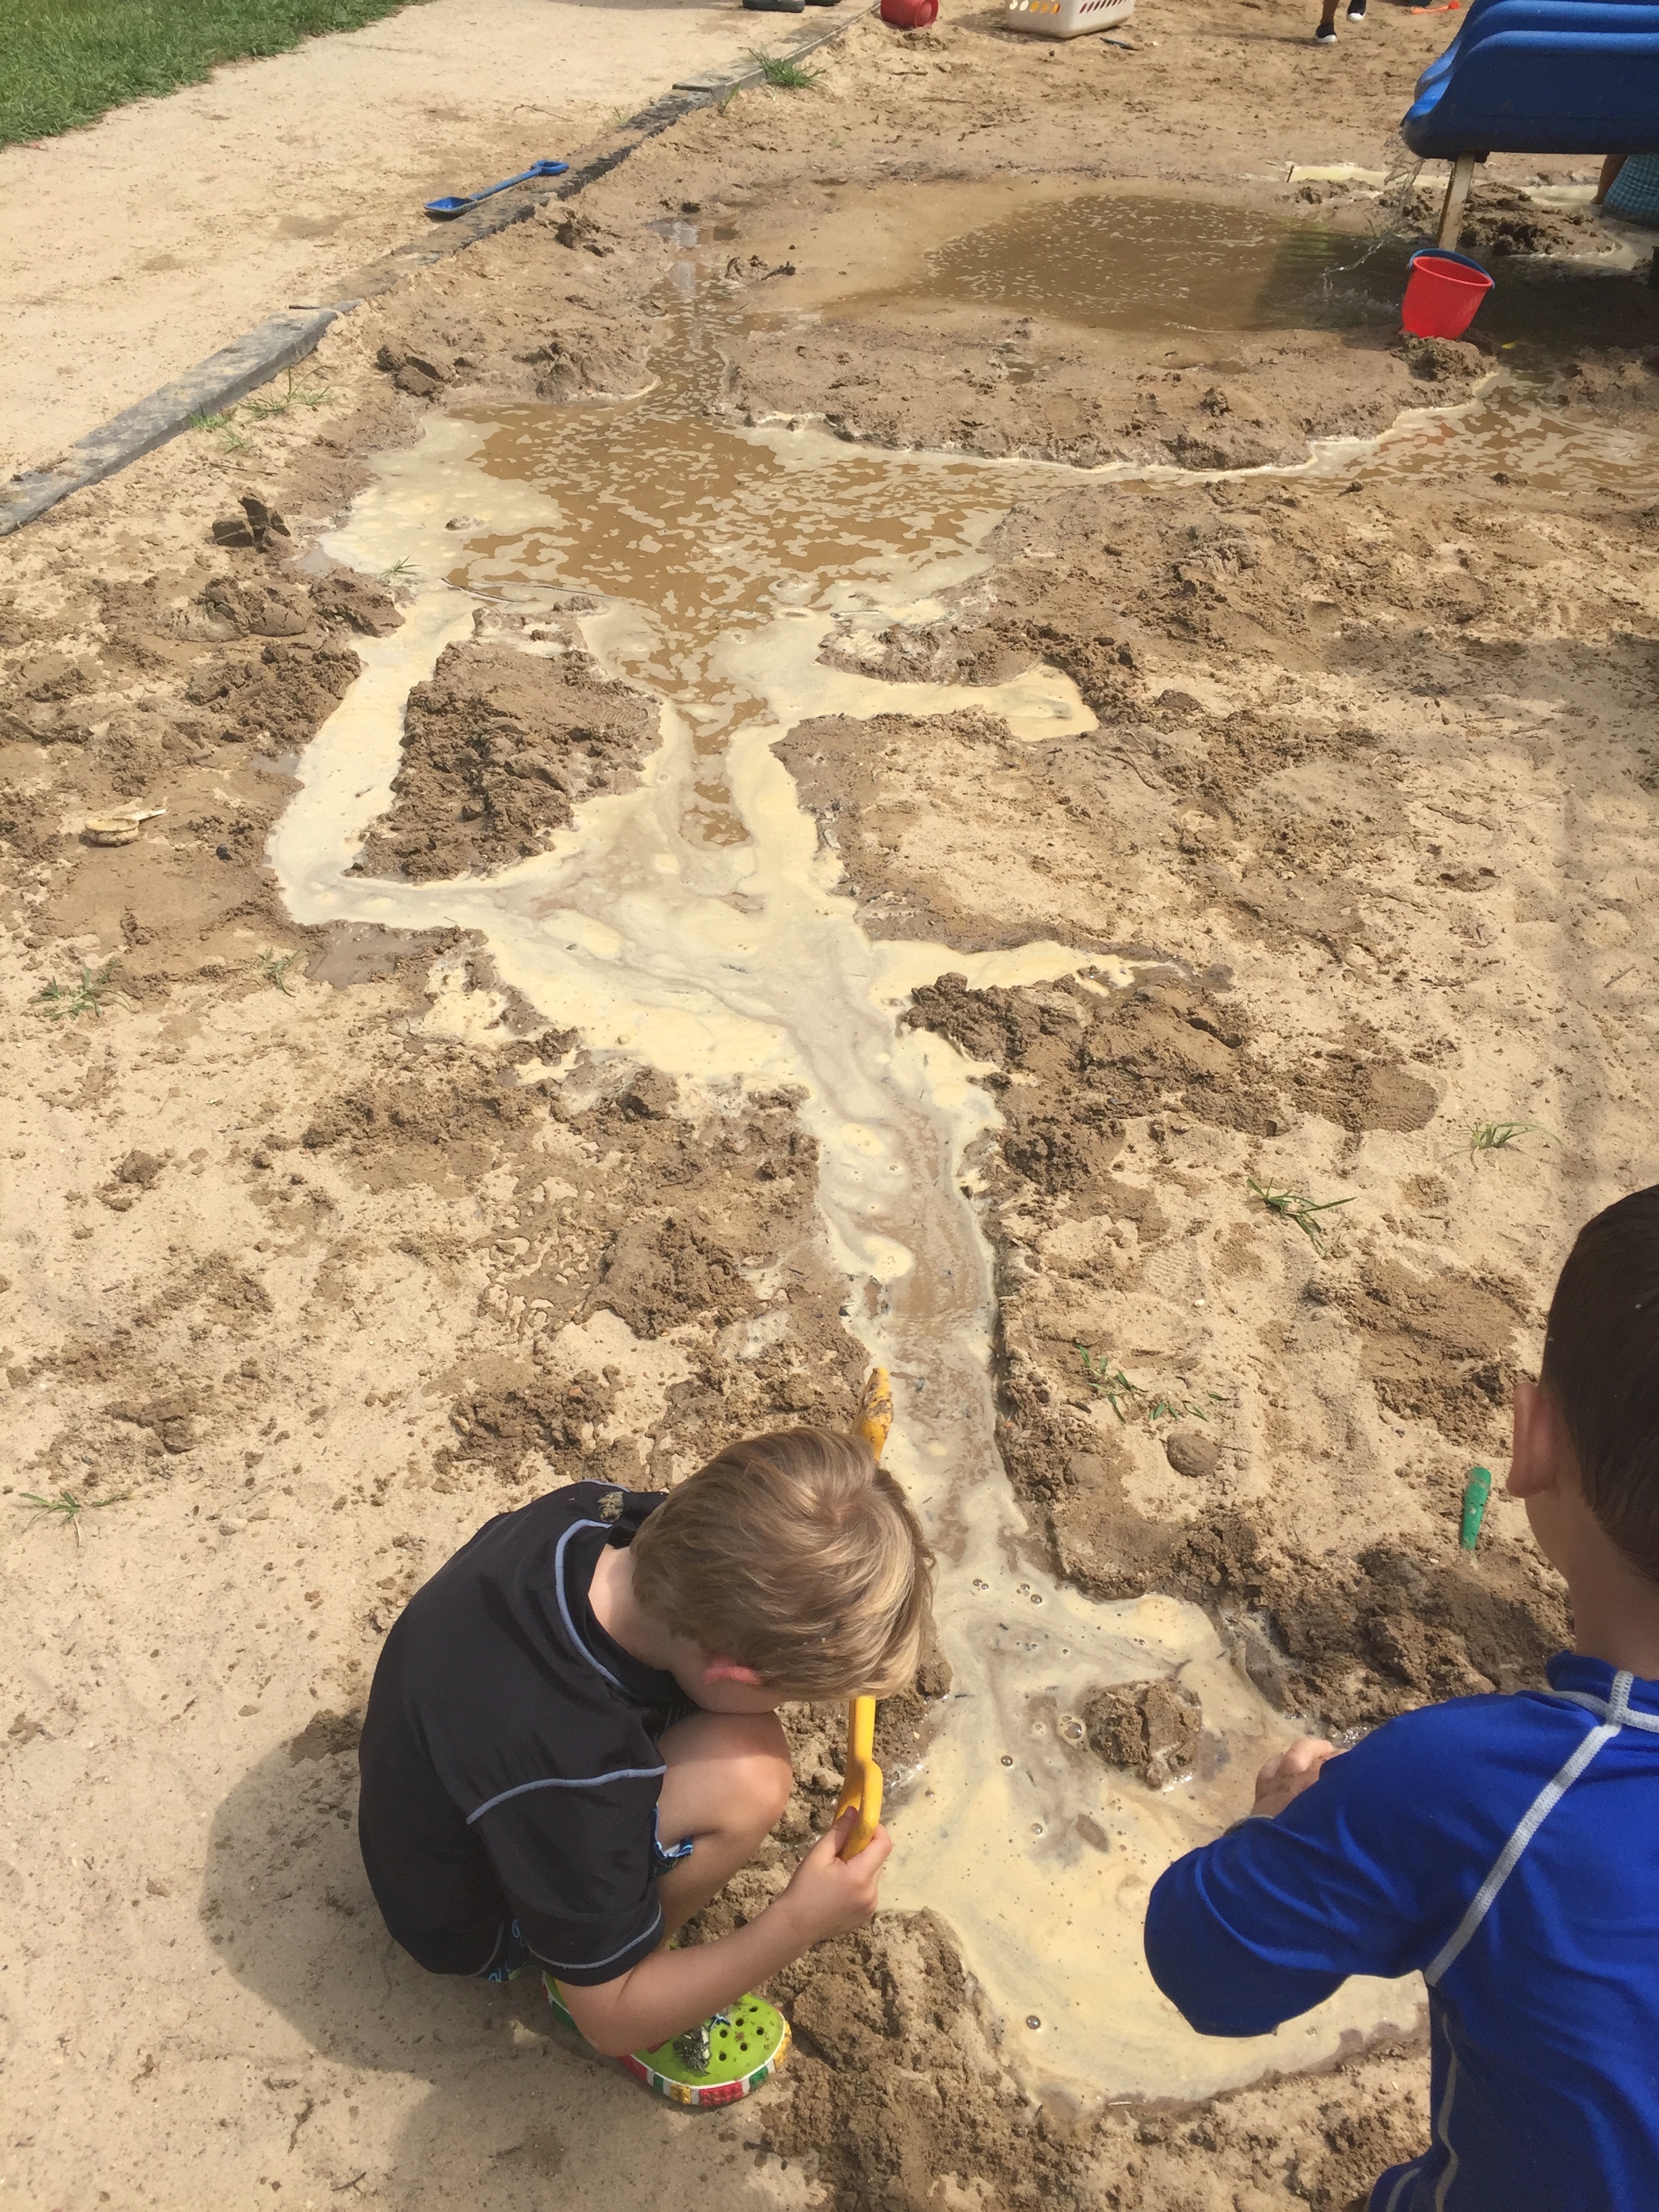 Two children digging a channel for water through a large expanse of sand.